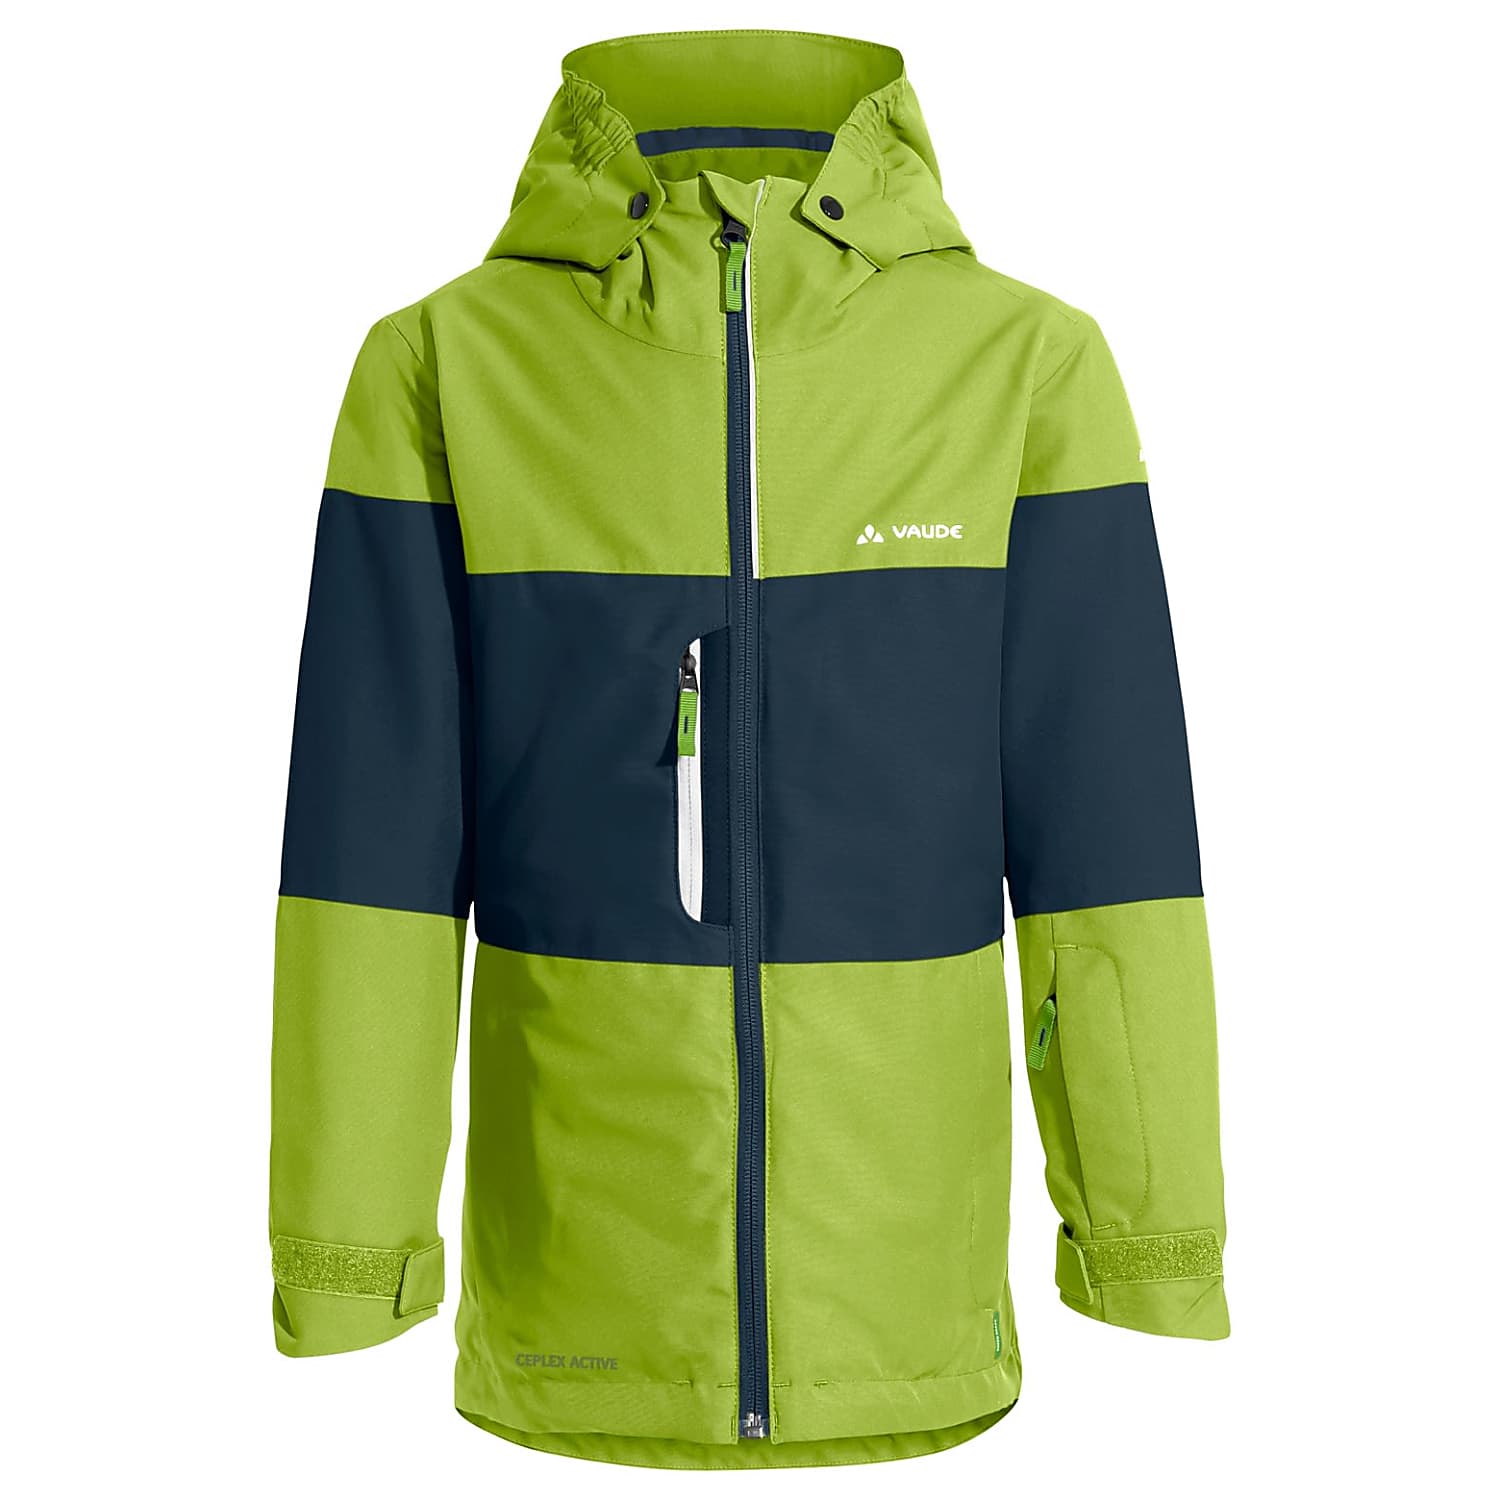 Vaude KIDS SNOW JACKET, shipping CUP Chute and - Fast Green cheap